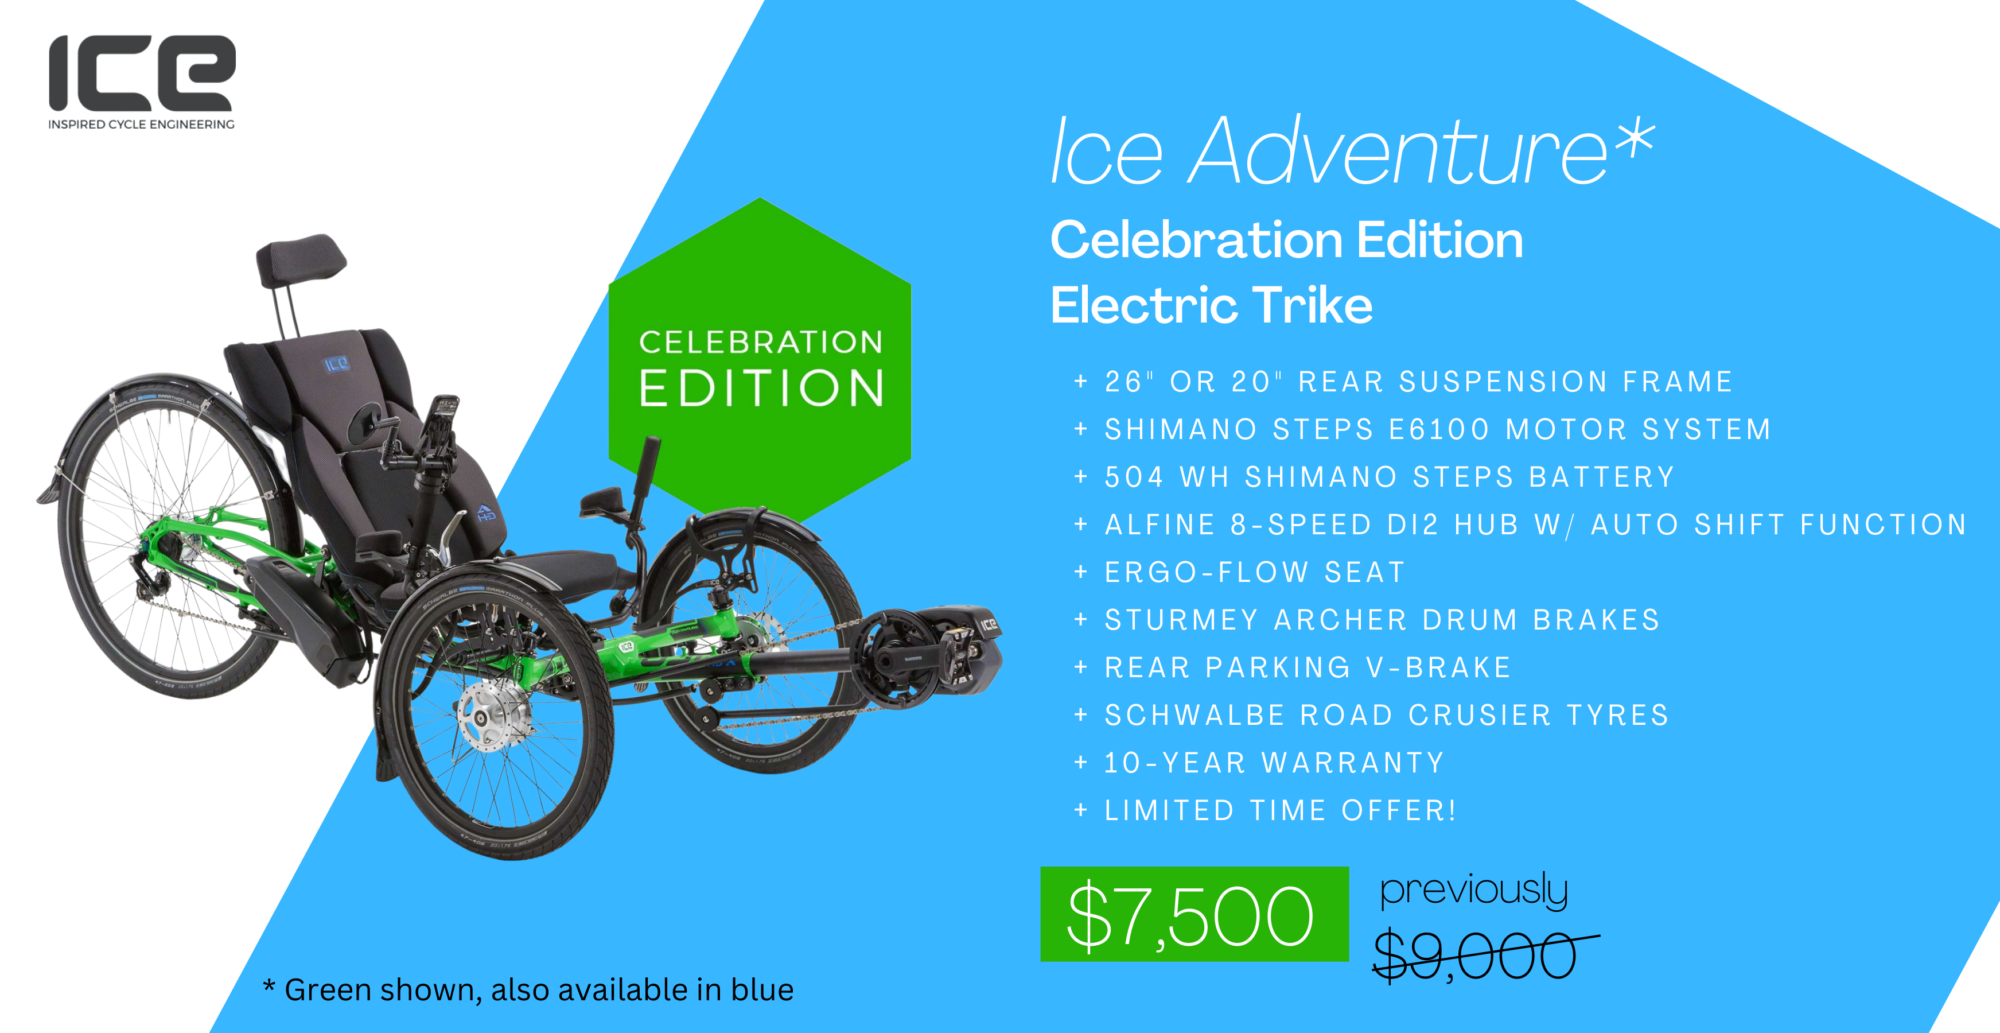 ICE ADVENTURE CELEBRATION ELECTRIC TRIKE WAS $9,000 NOW $7,500. CALL US FOR ADDITIONAL SPECS AT (614)478-7777!